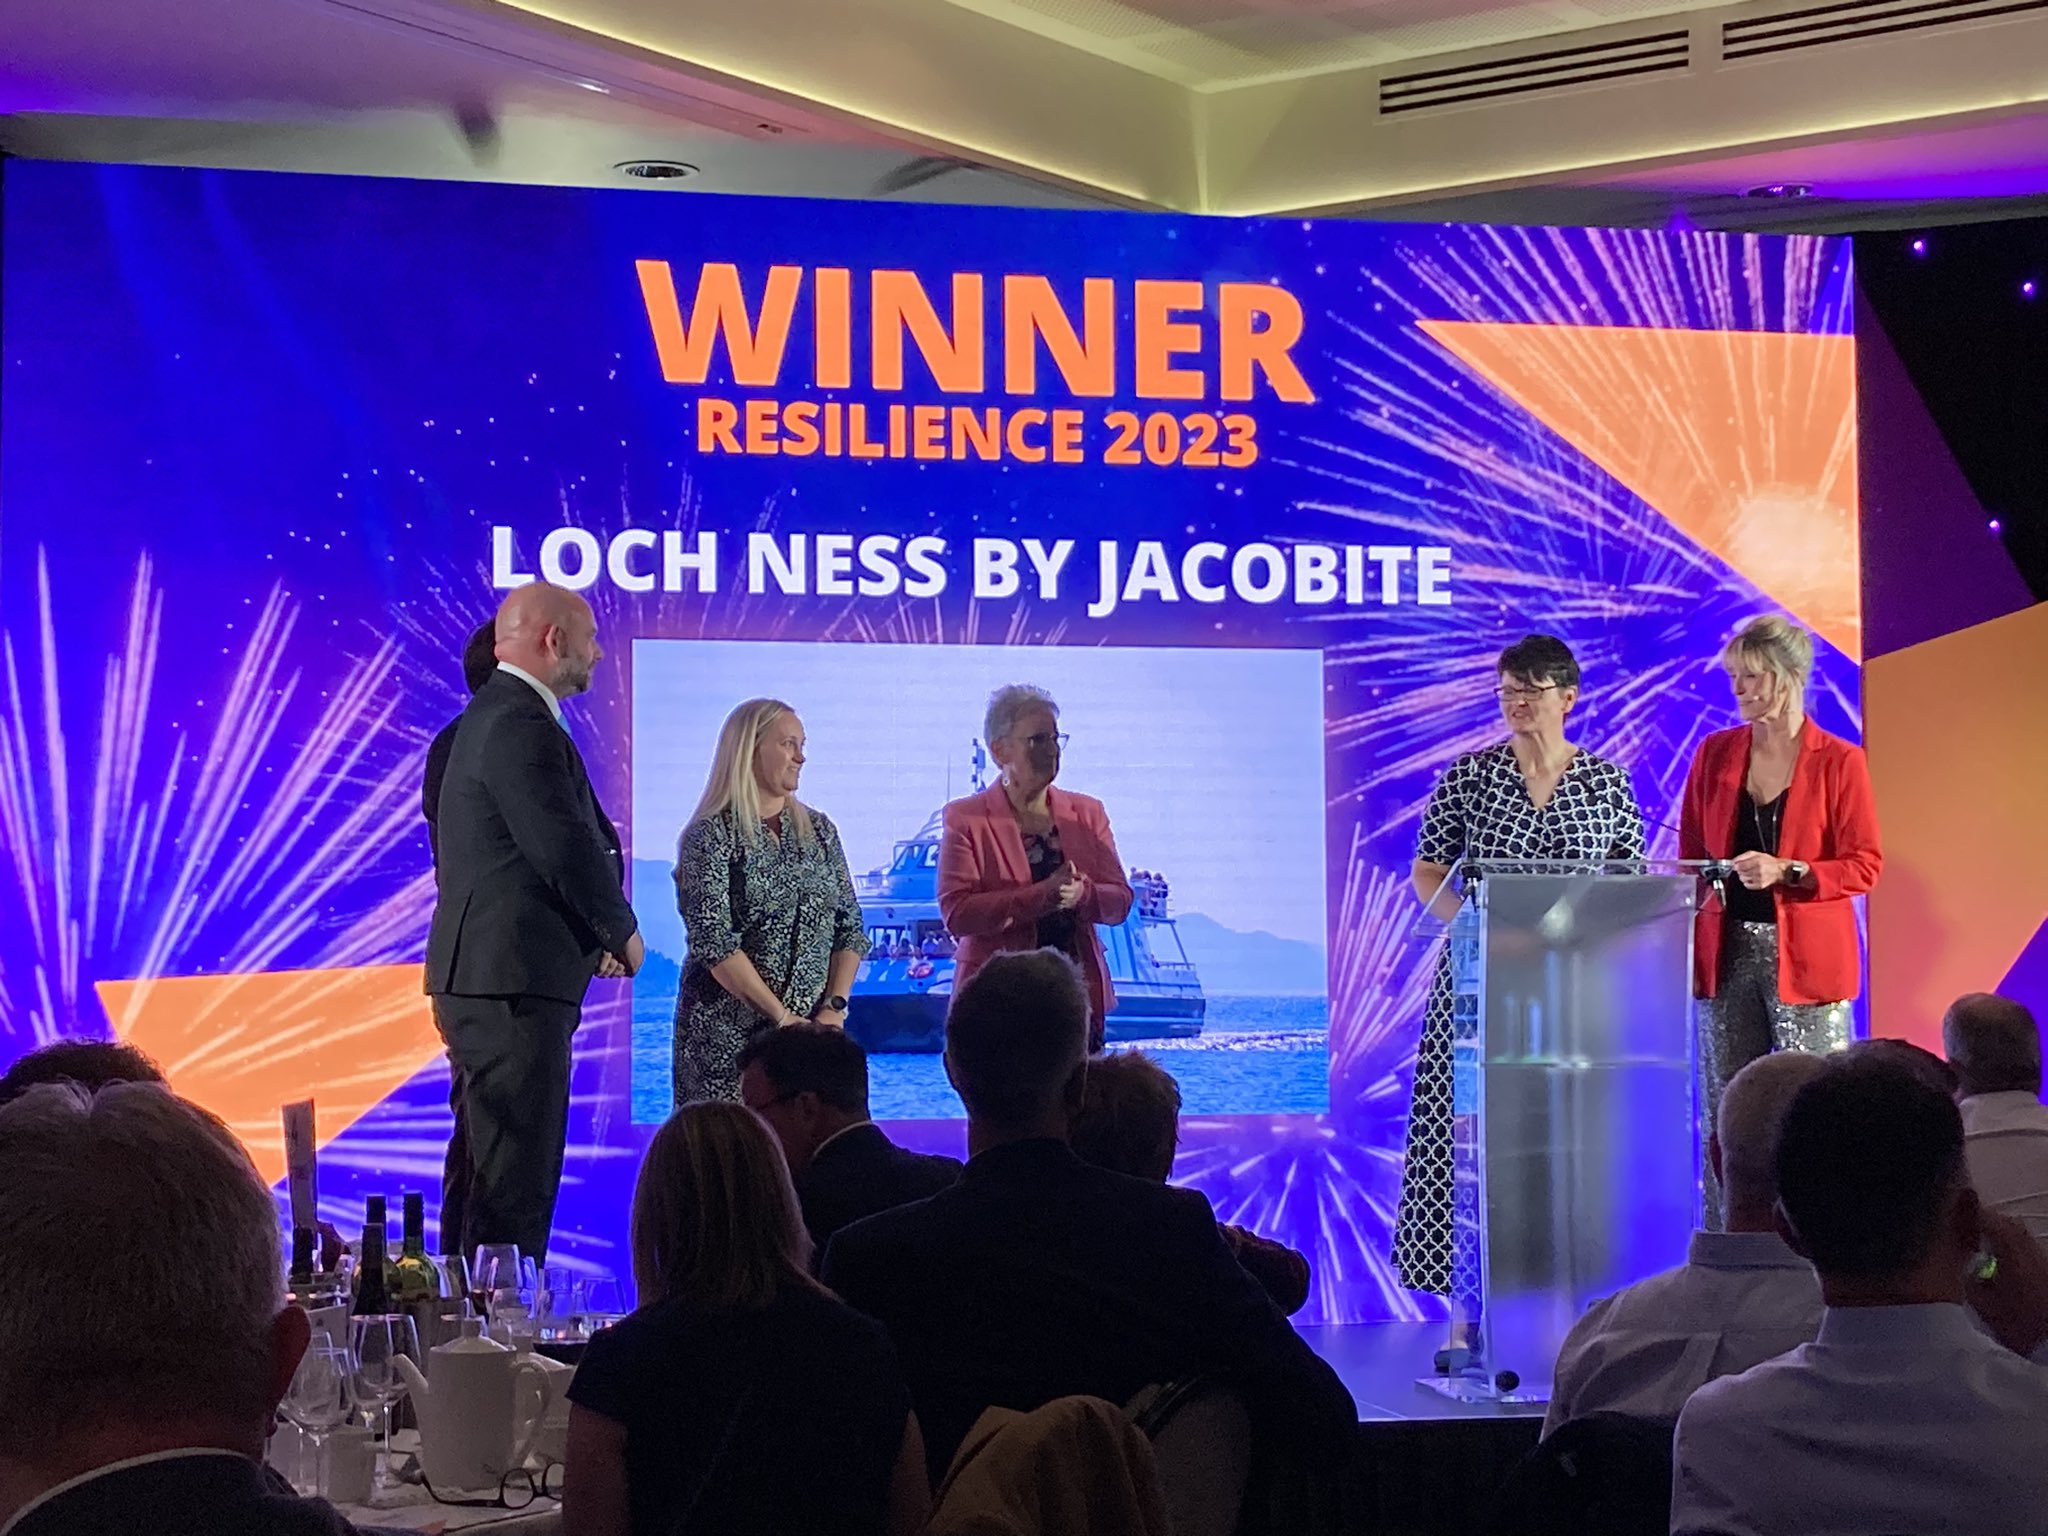 the Award for Resilience, which was awarded to Loch Ness by Jacobite